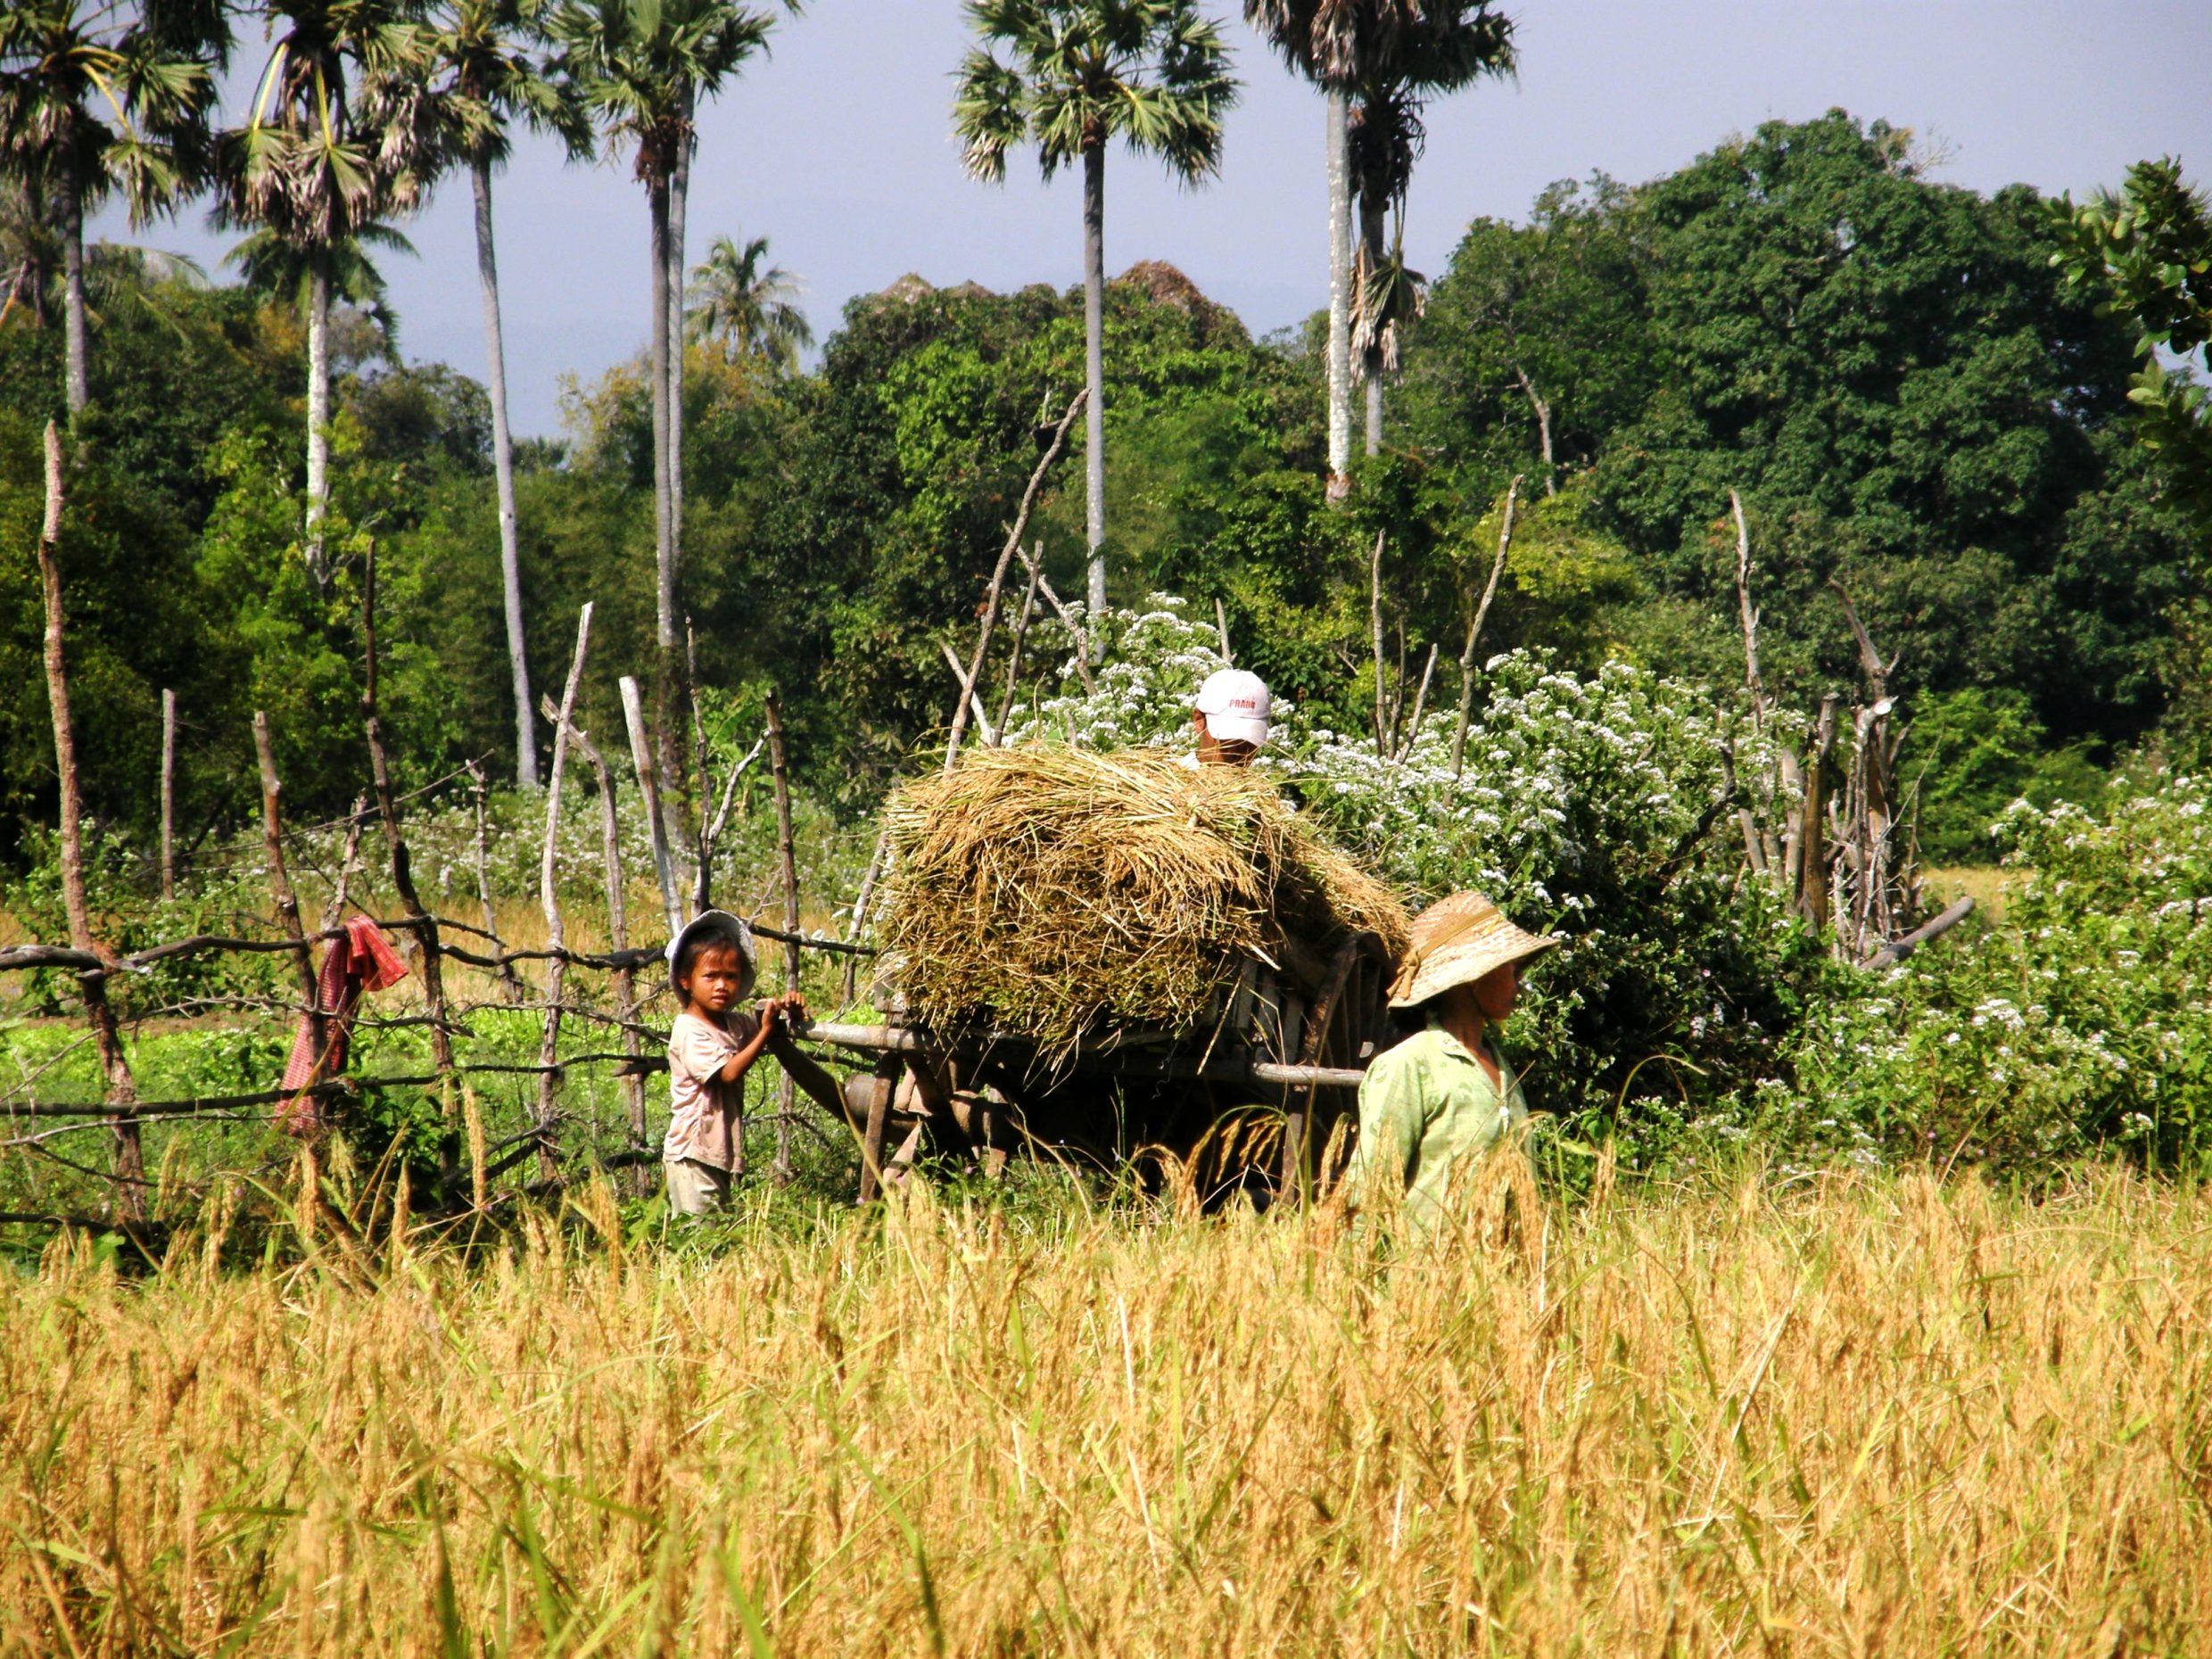 Locals in fields along route to Phnom K'Chnor Caves